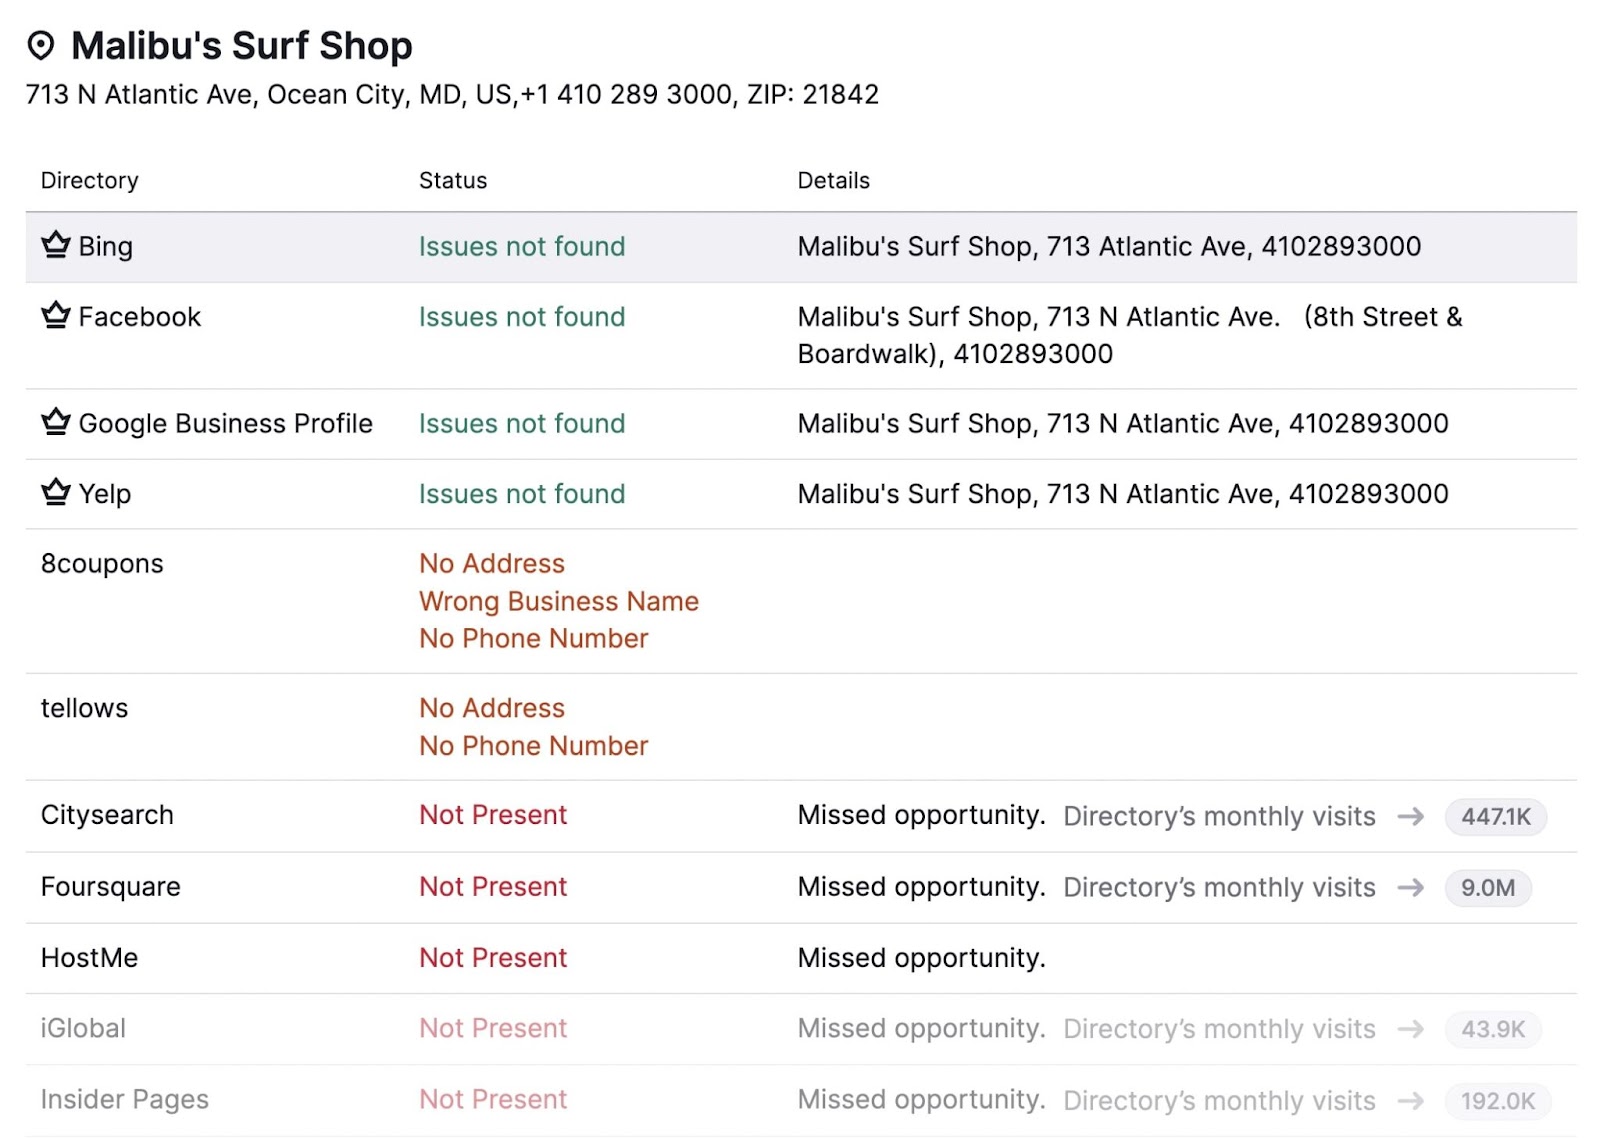 Malibu's Surf Shop page in Listing Management tool, showing a list of issues